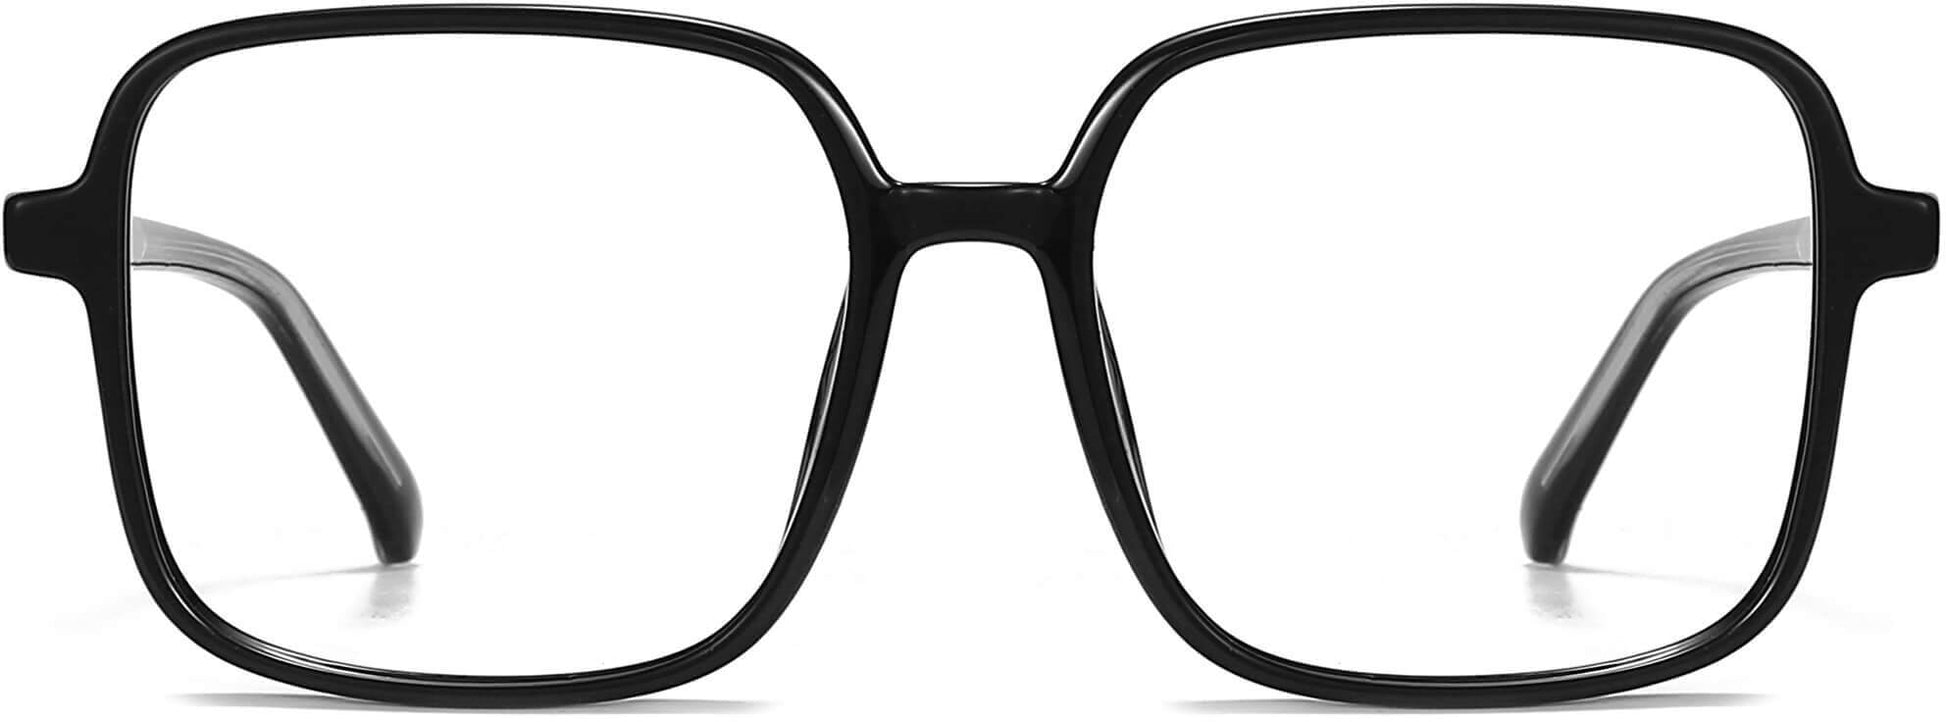 Keanu Square Black Eyeglasses from ANRRI, front view